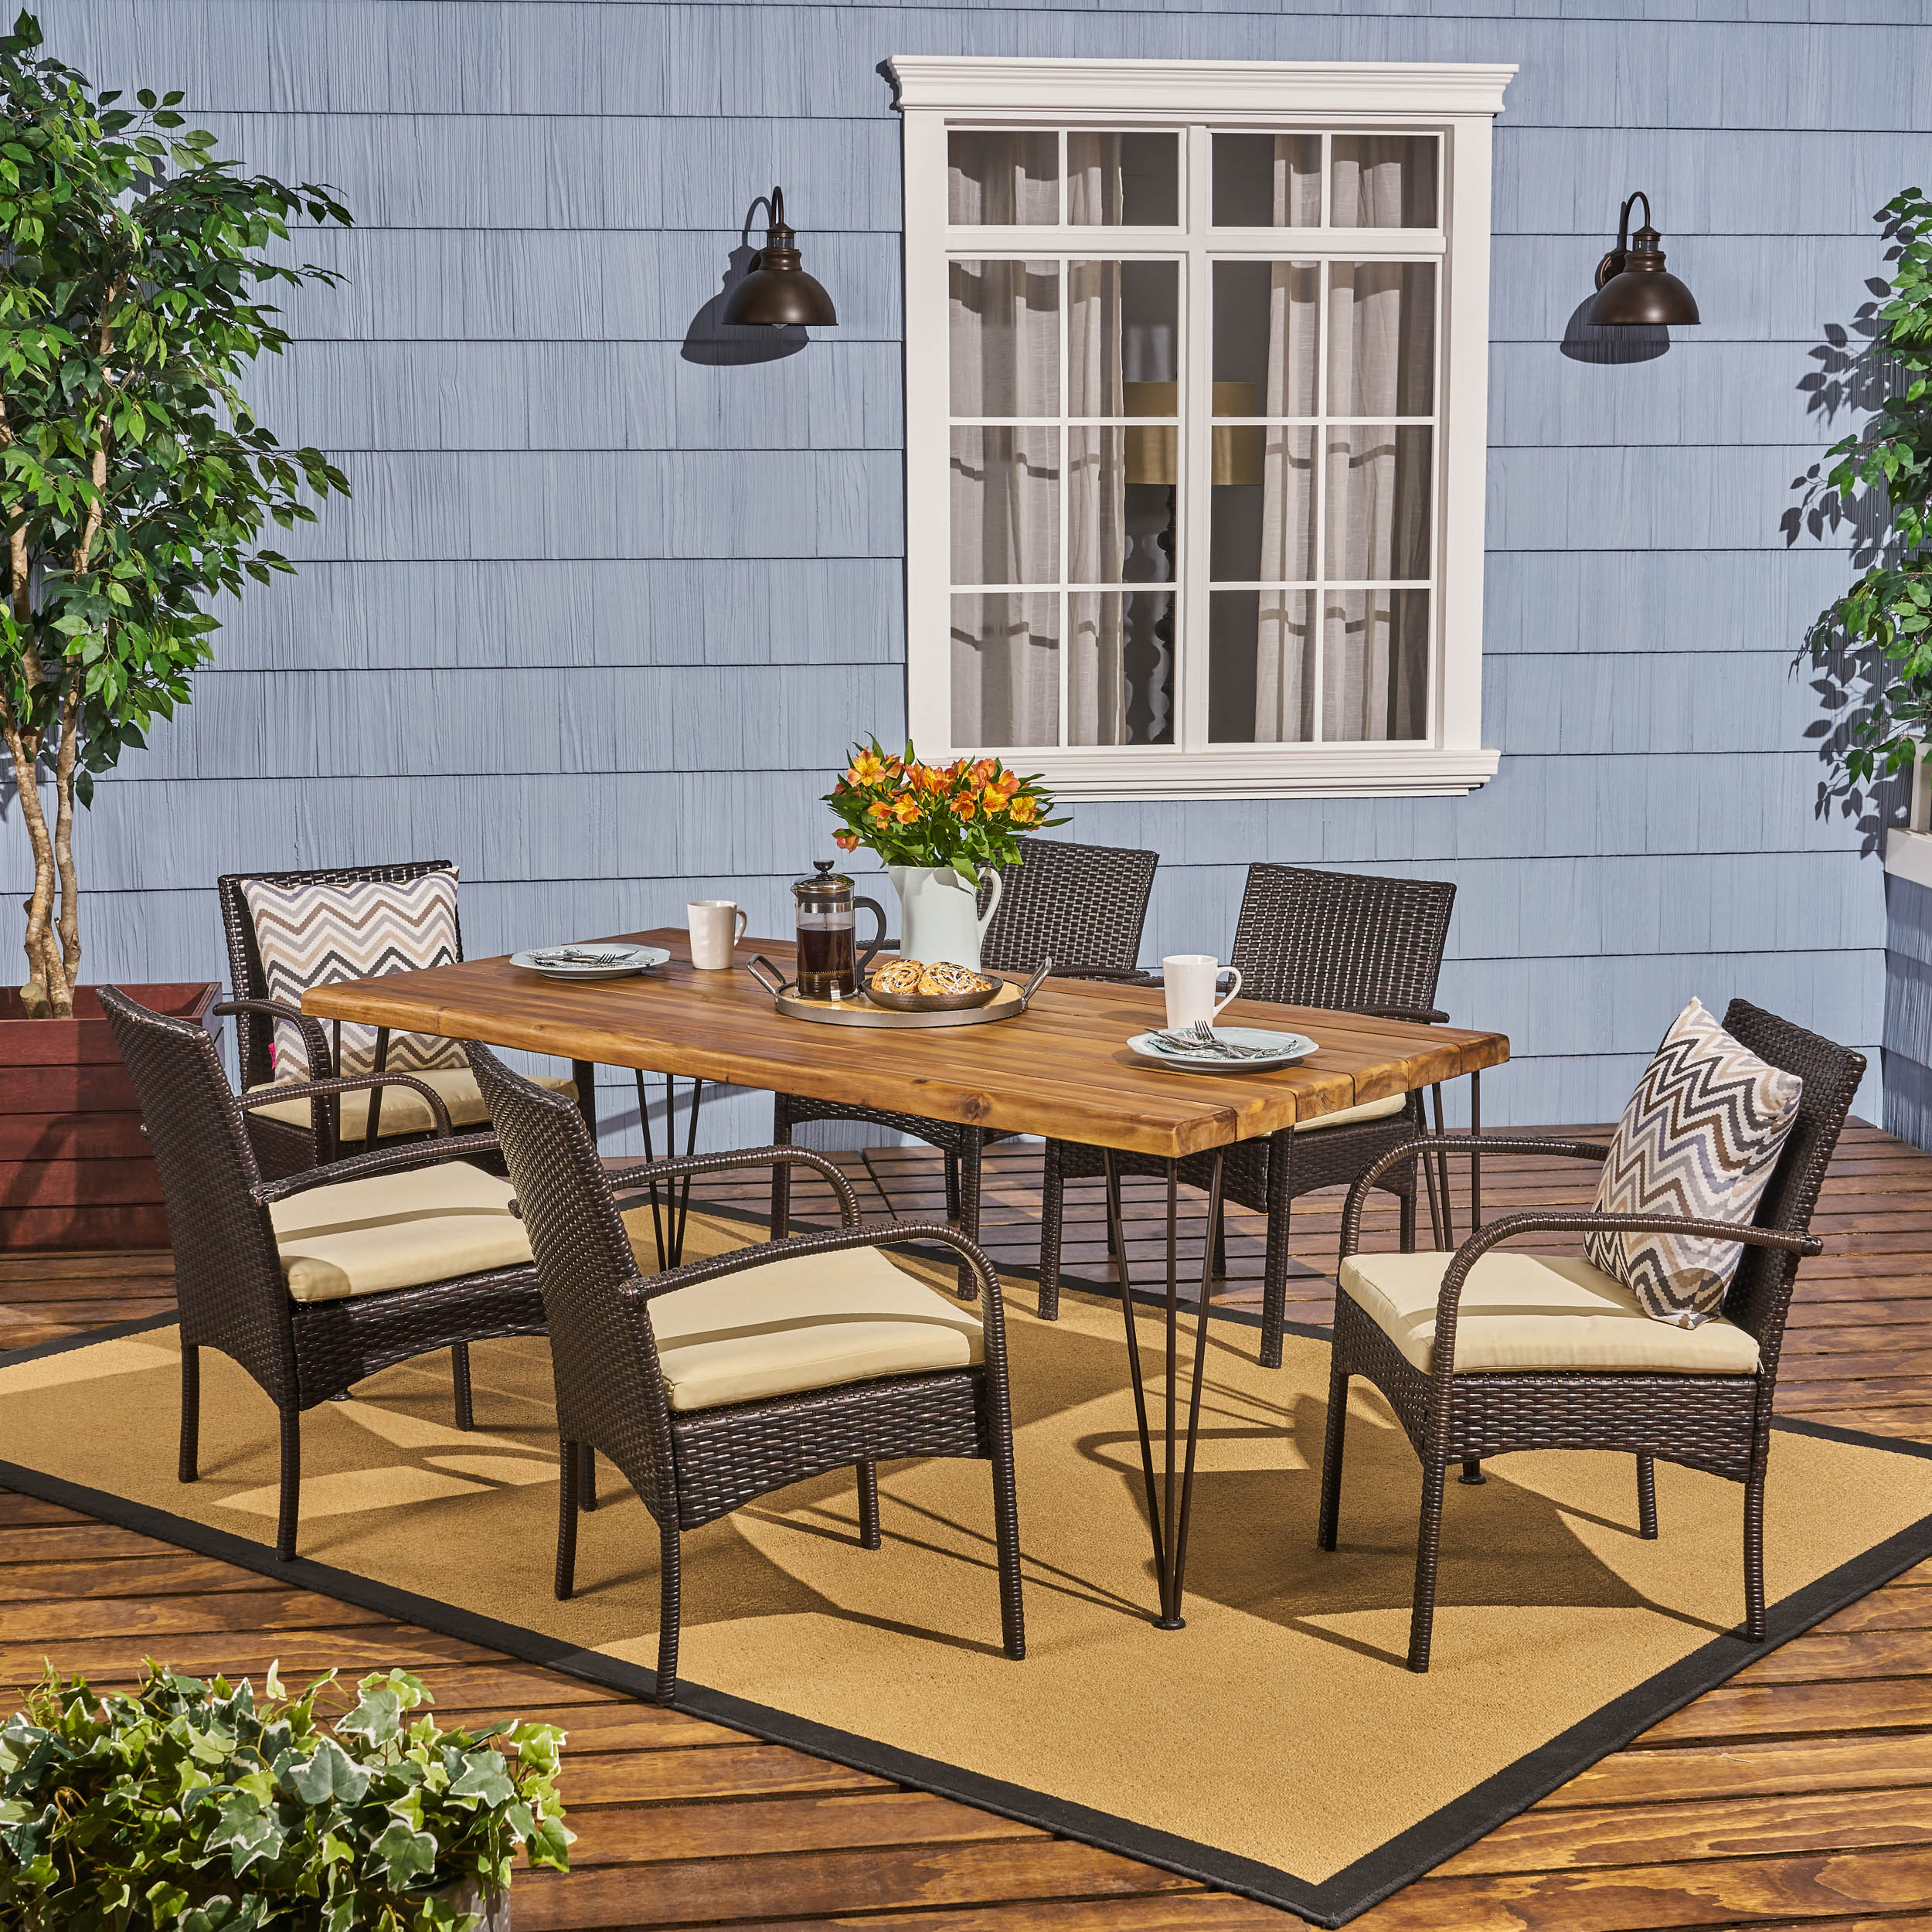 Leon Outdoor 72 Inch 7 Piece Acacia Wood Dining Set with Iron Table Legs and Wicker Chairs with Cushions, Teak, Rustic Metal, Multi-Brown, Cream - image 1 of 7